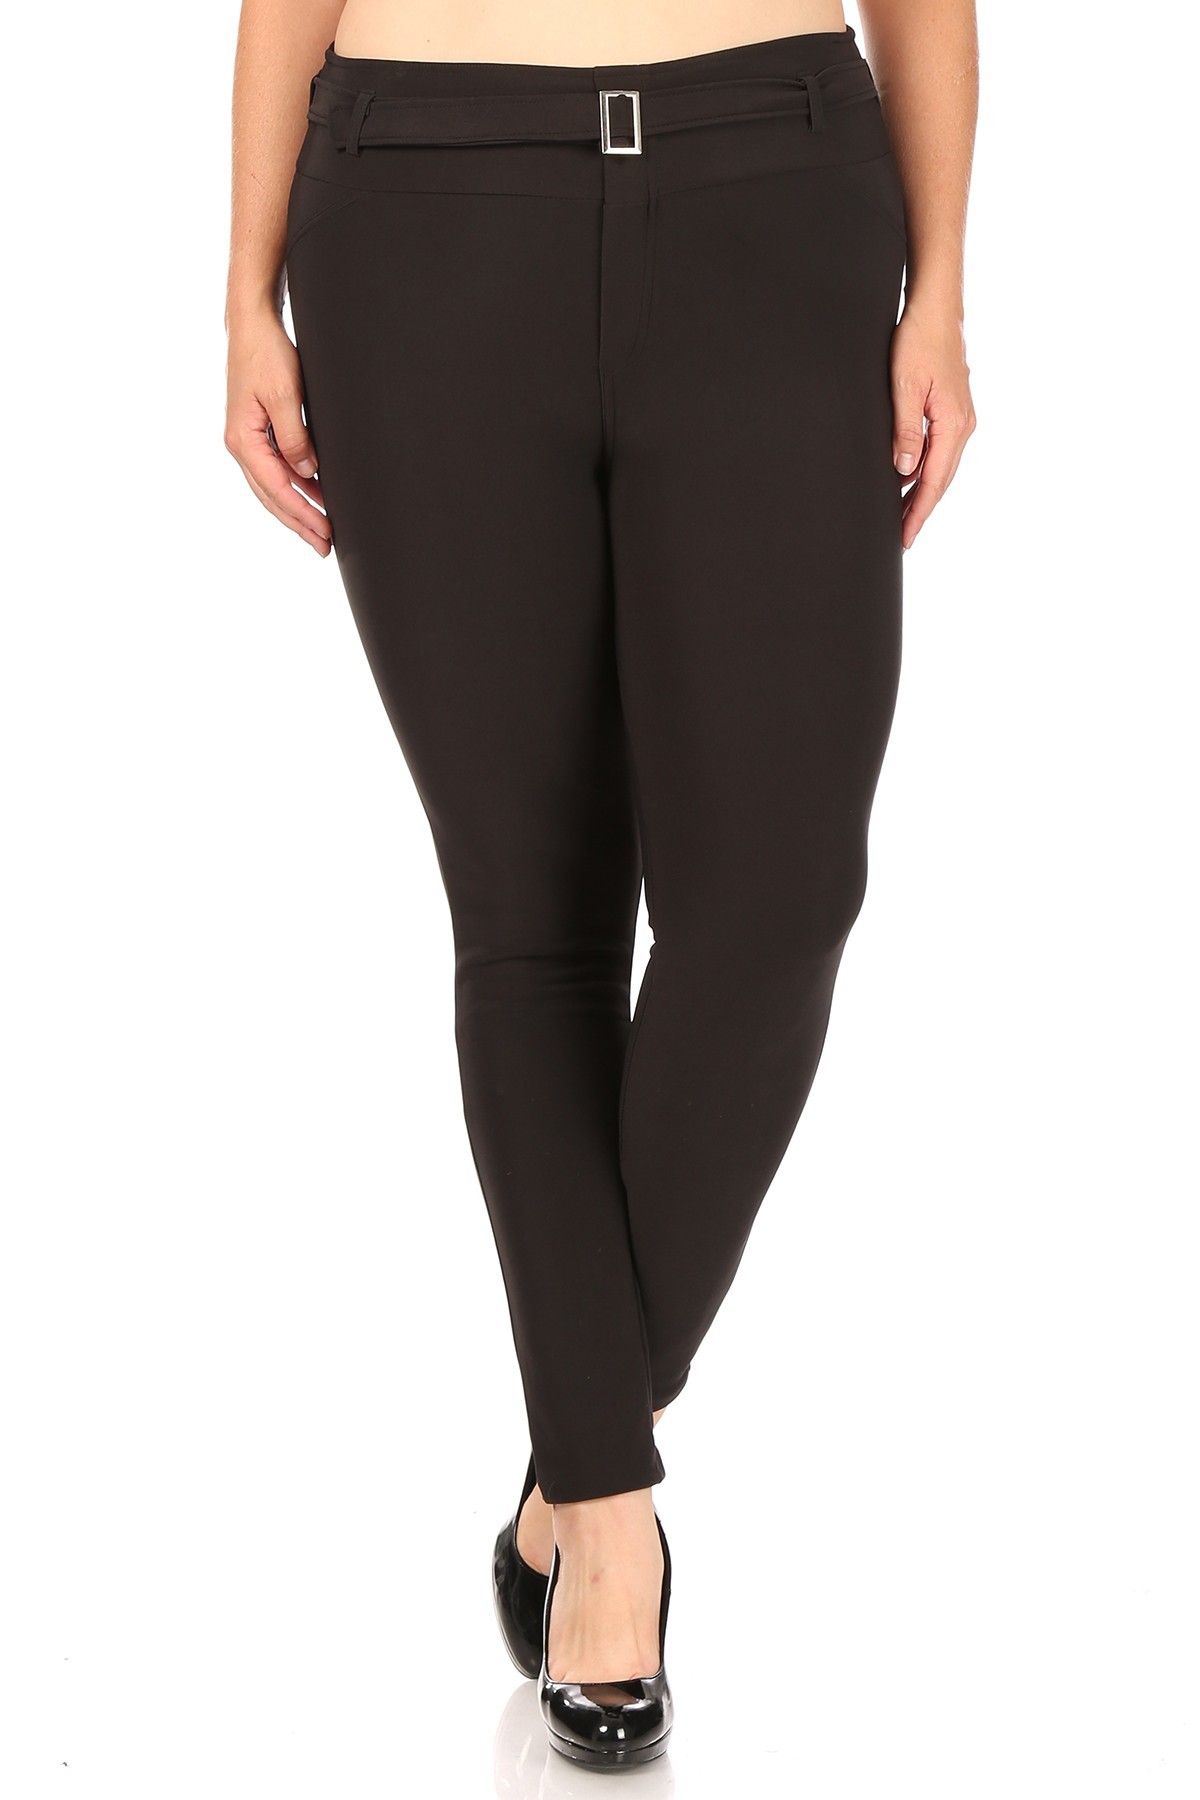 Wholesale Black Belted Plus Size Treggings with Pockets